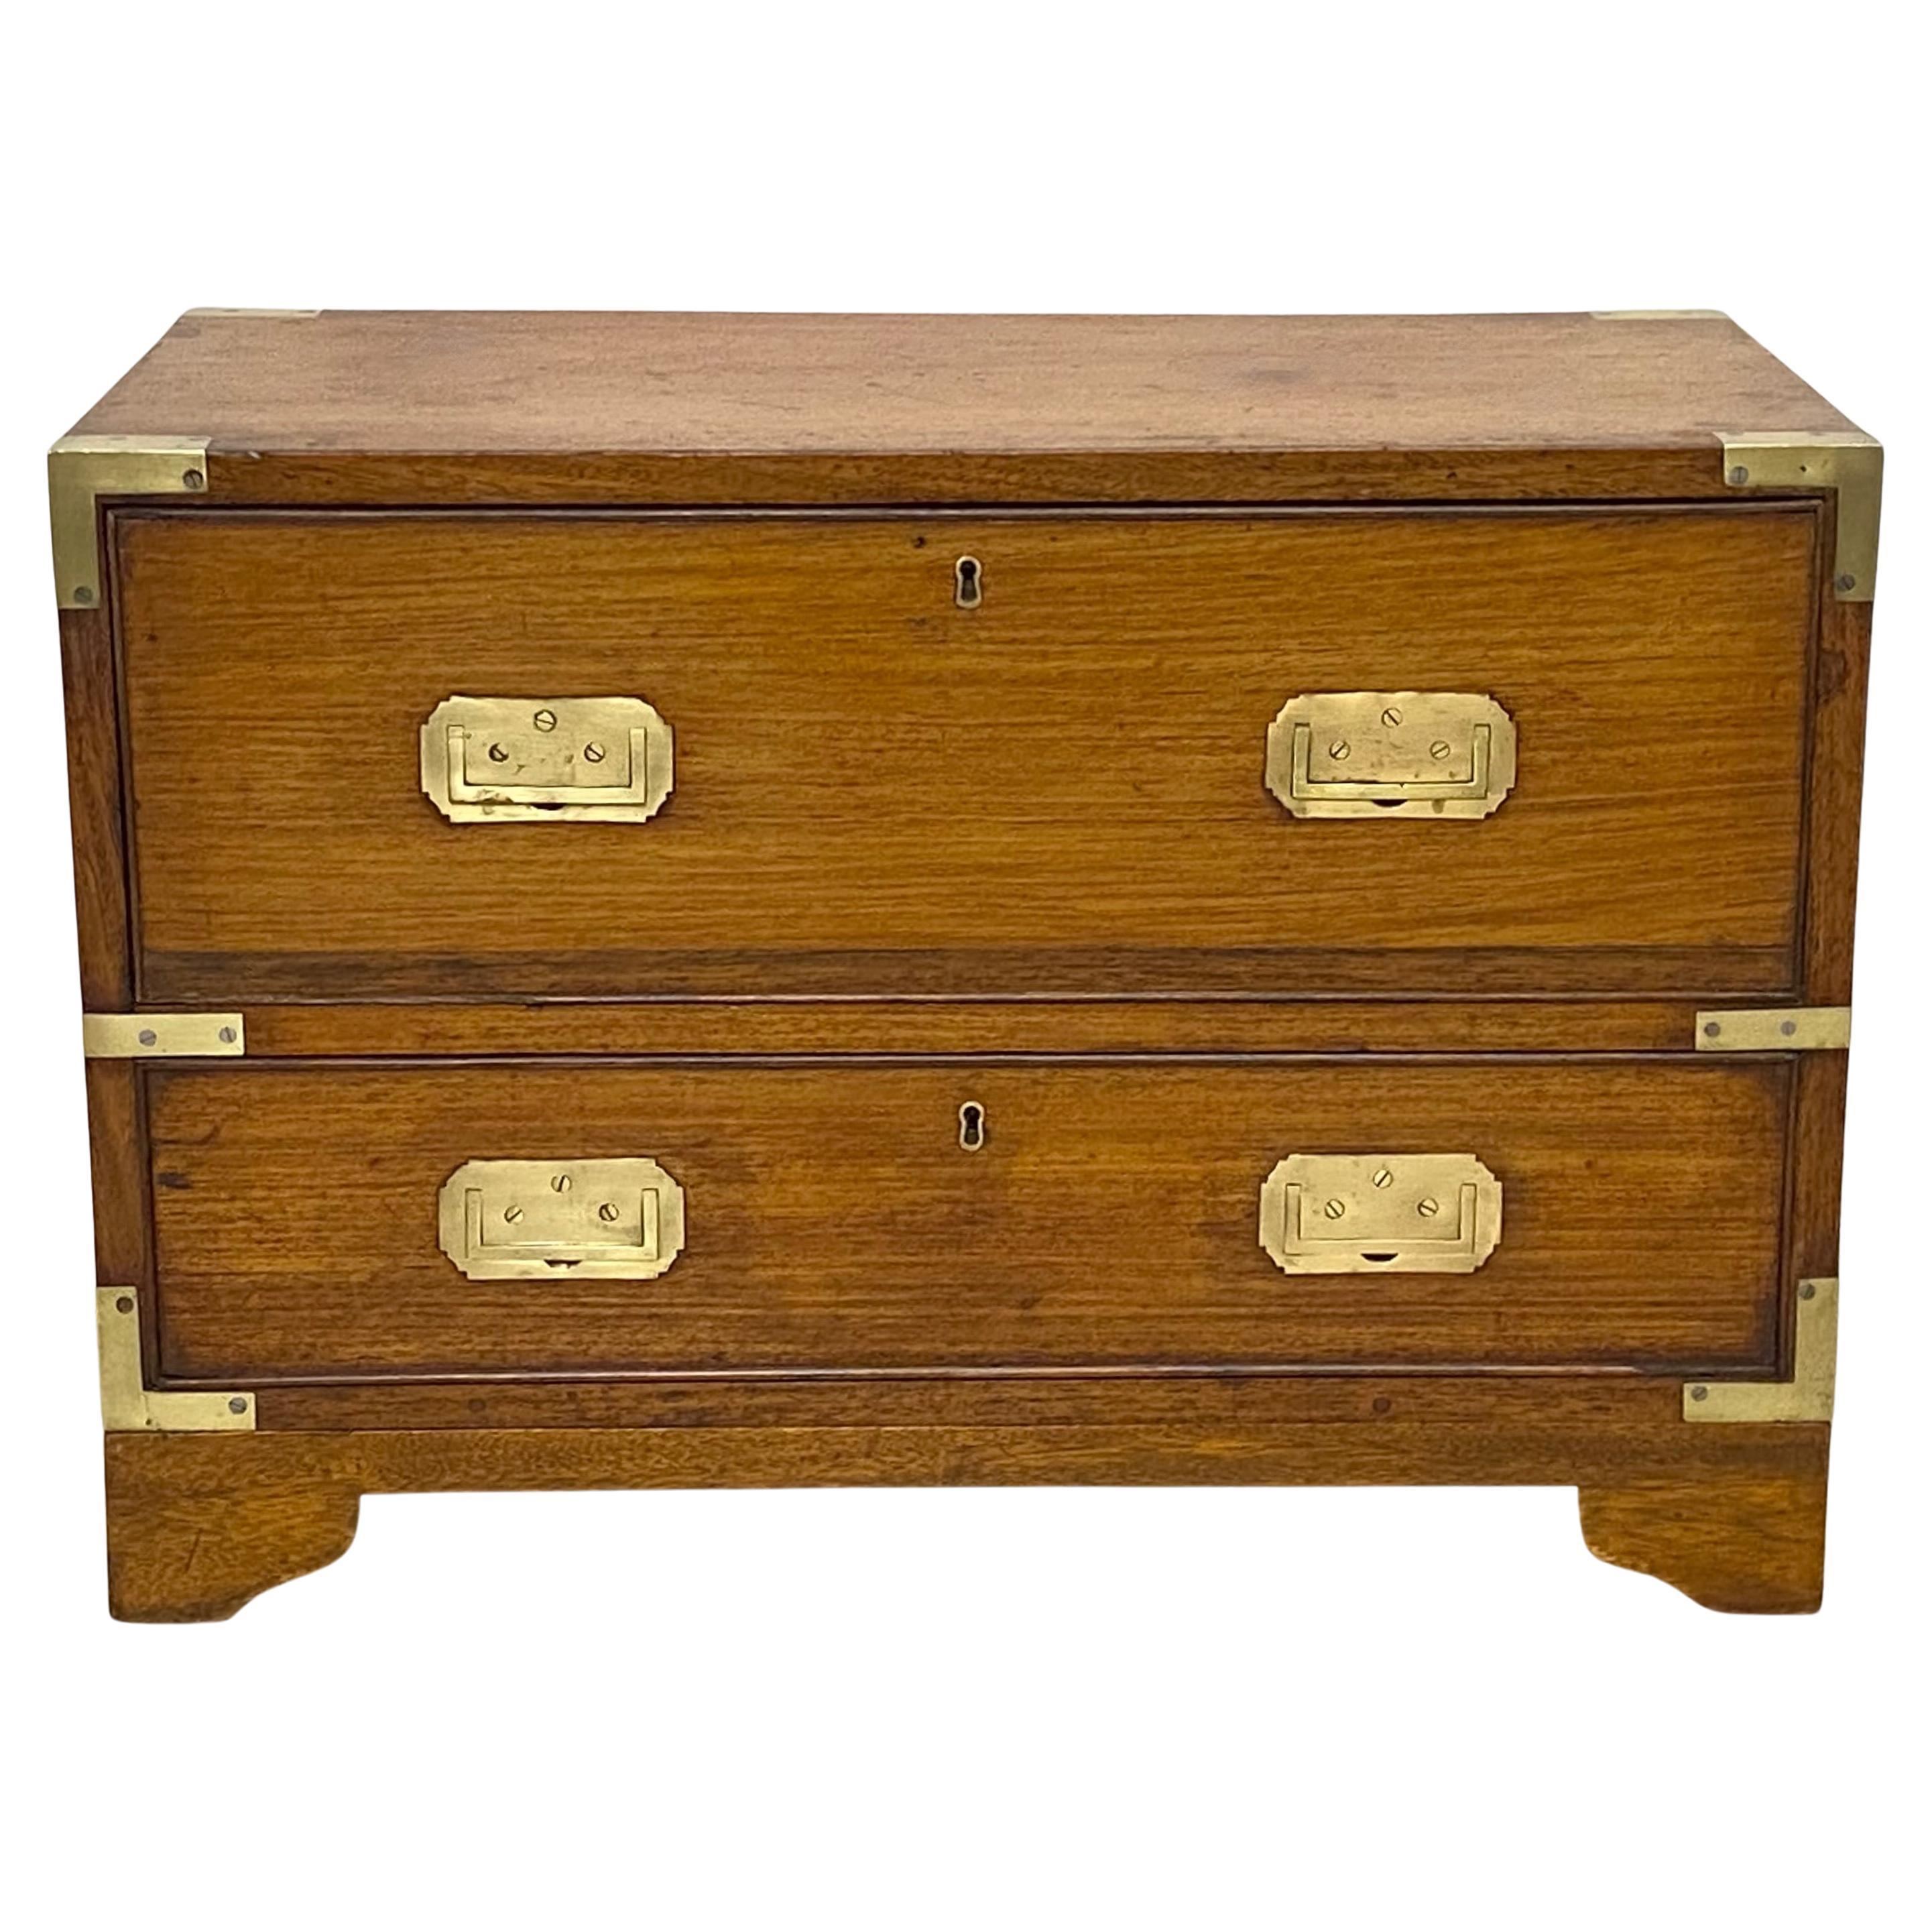 Teak and Mahogany Campaign Chest Coffee Table / Writing Desk, 19th Century